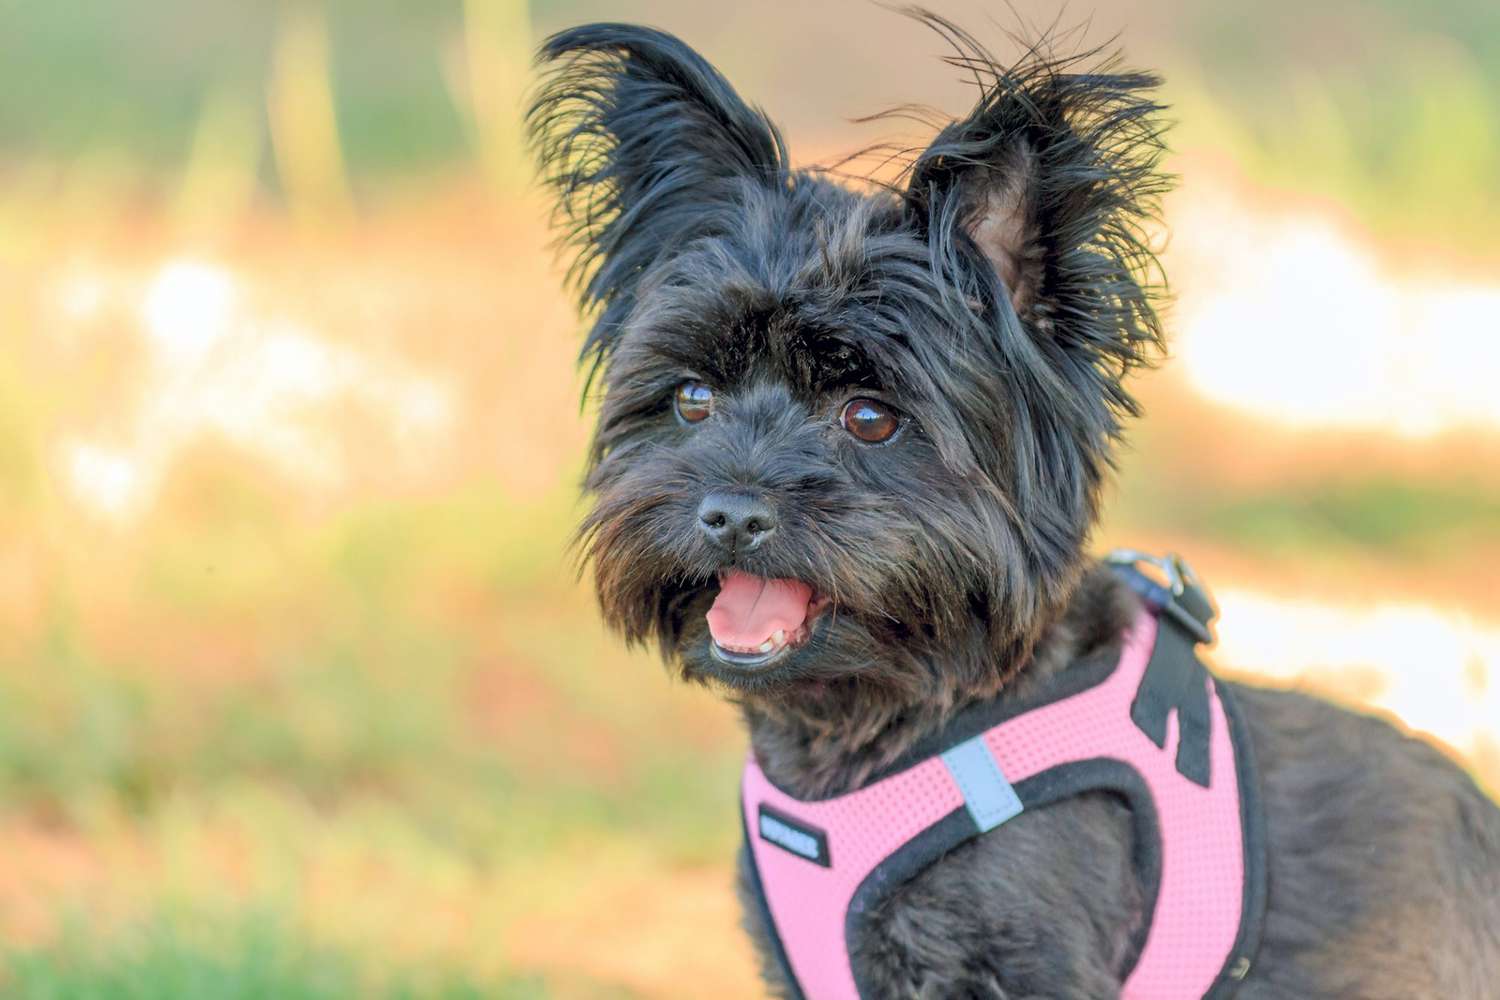 Black morkie with perky ears wearing pink harness